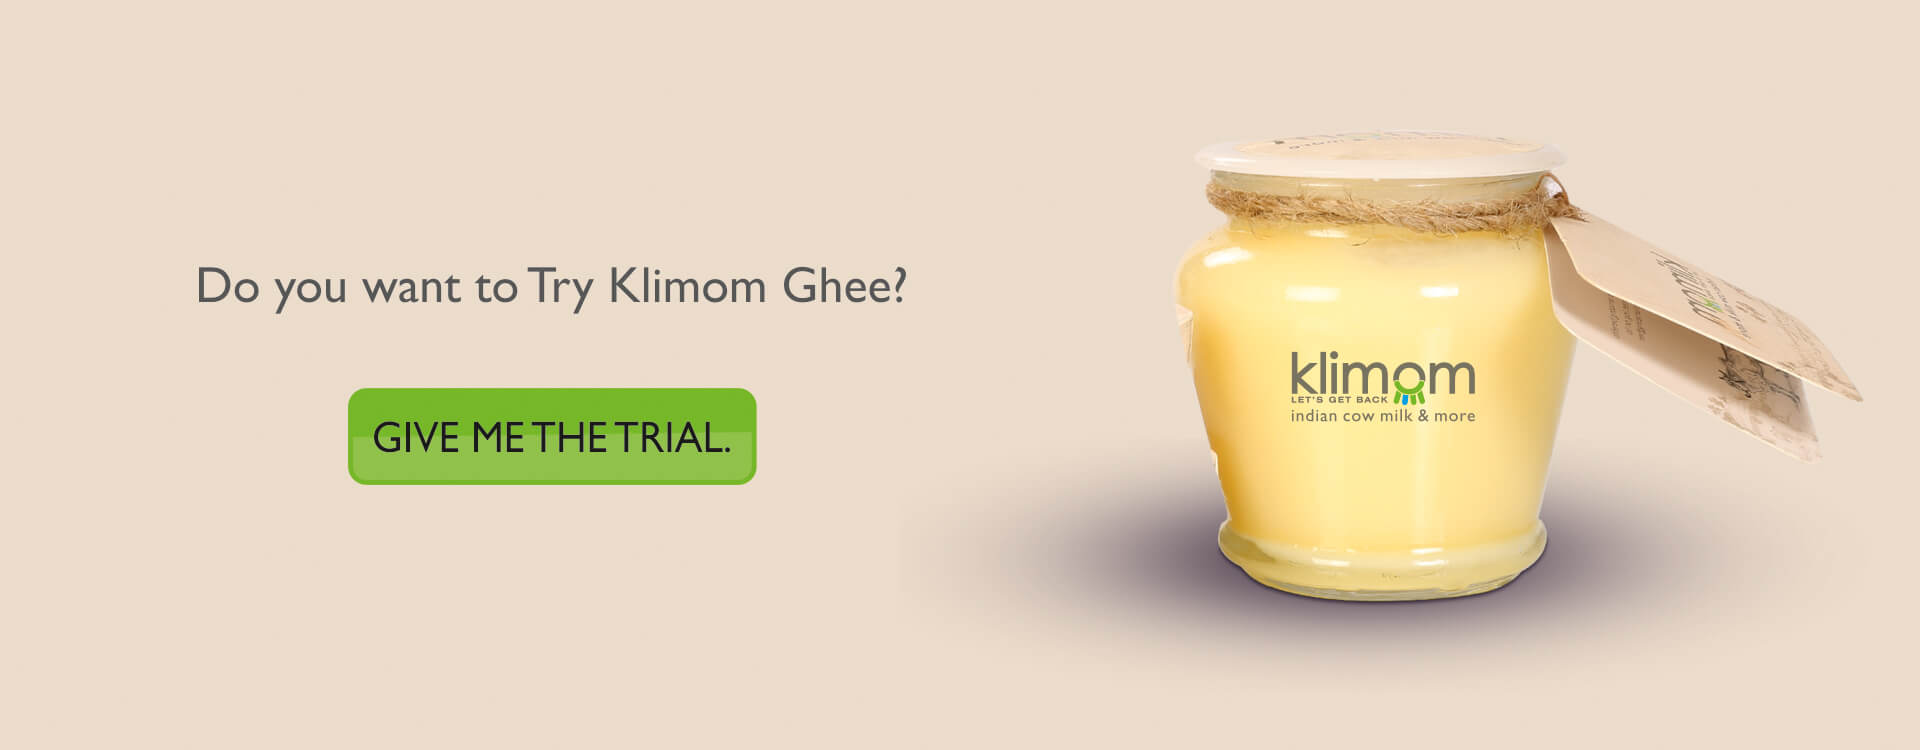 Best Desi Indian Cow Products | Klimom Cow Products